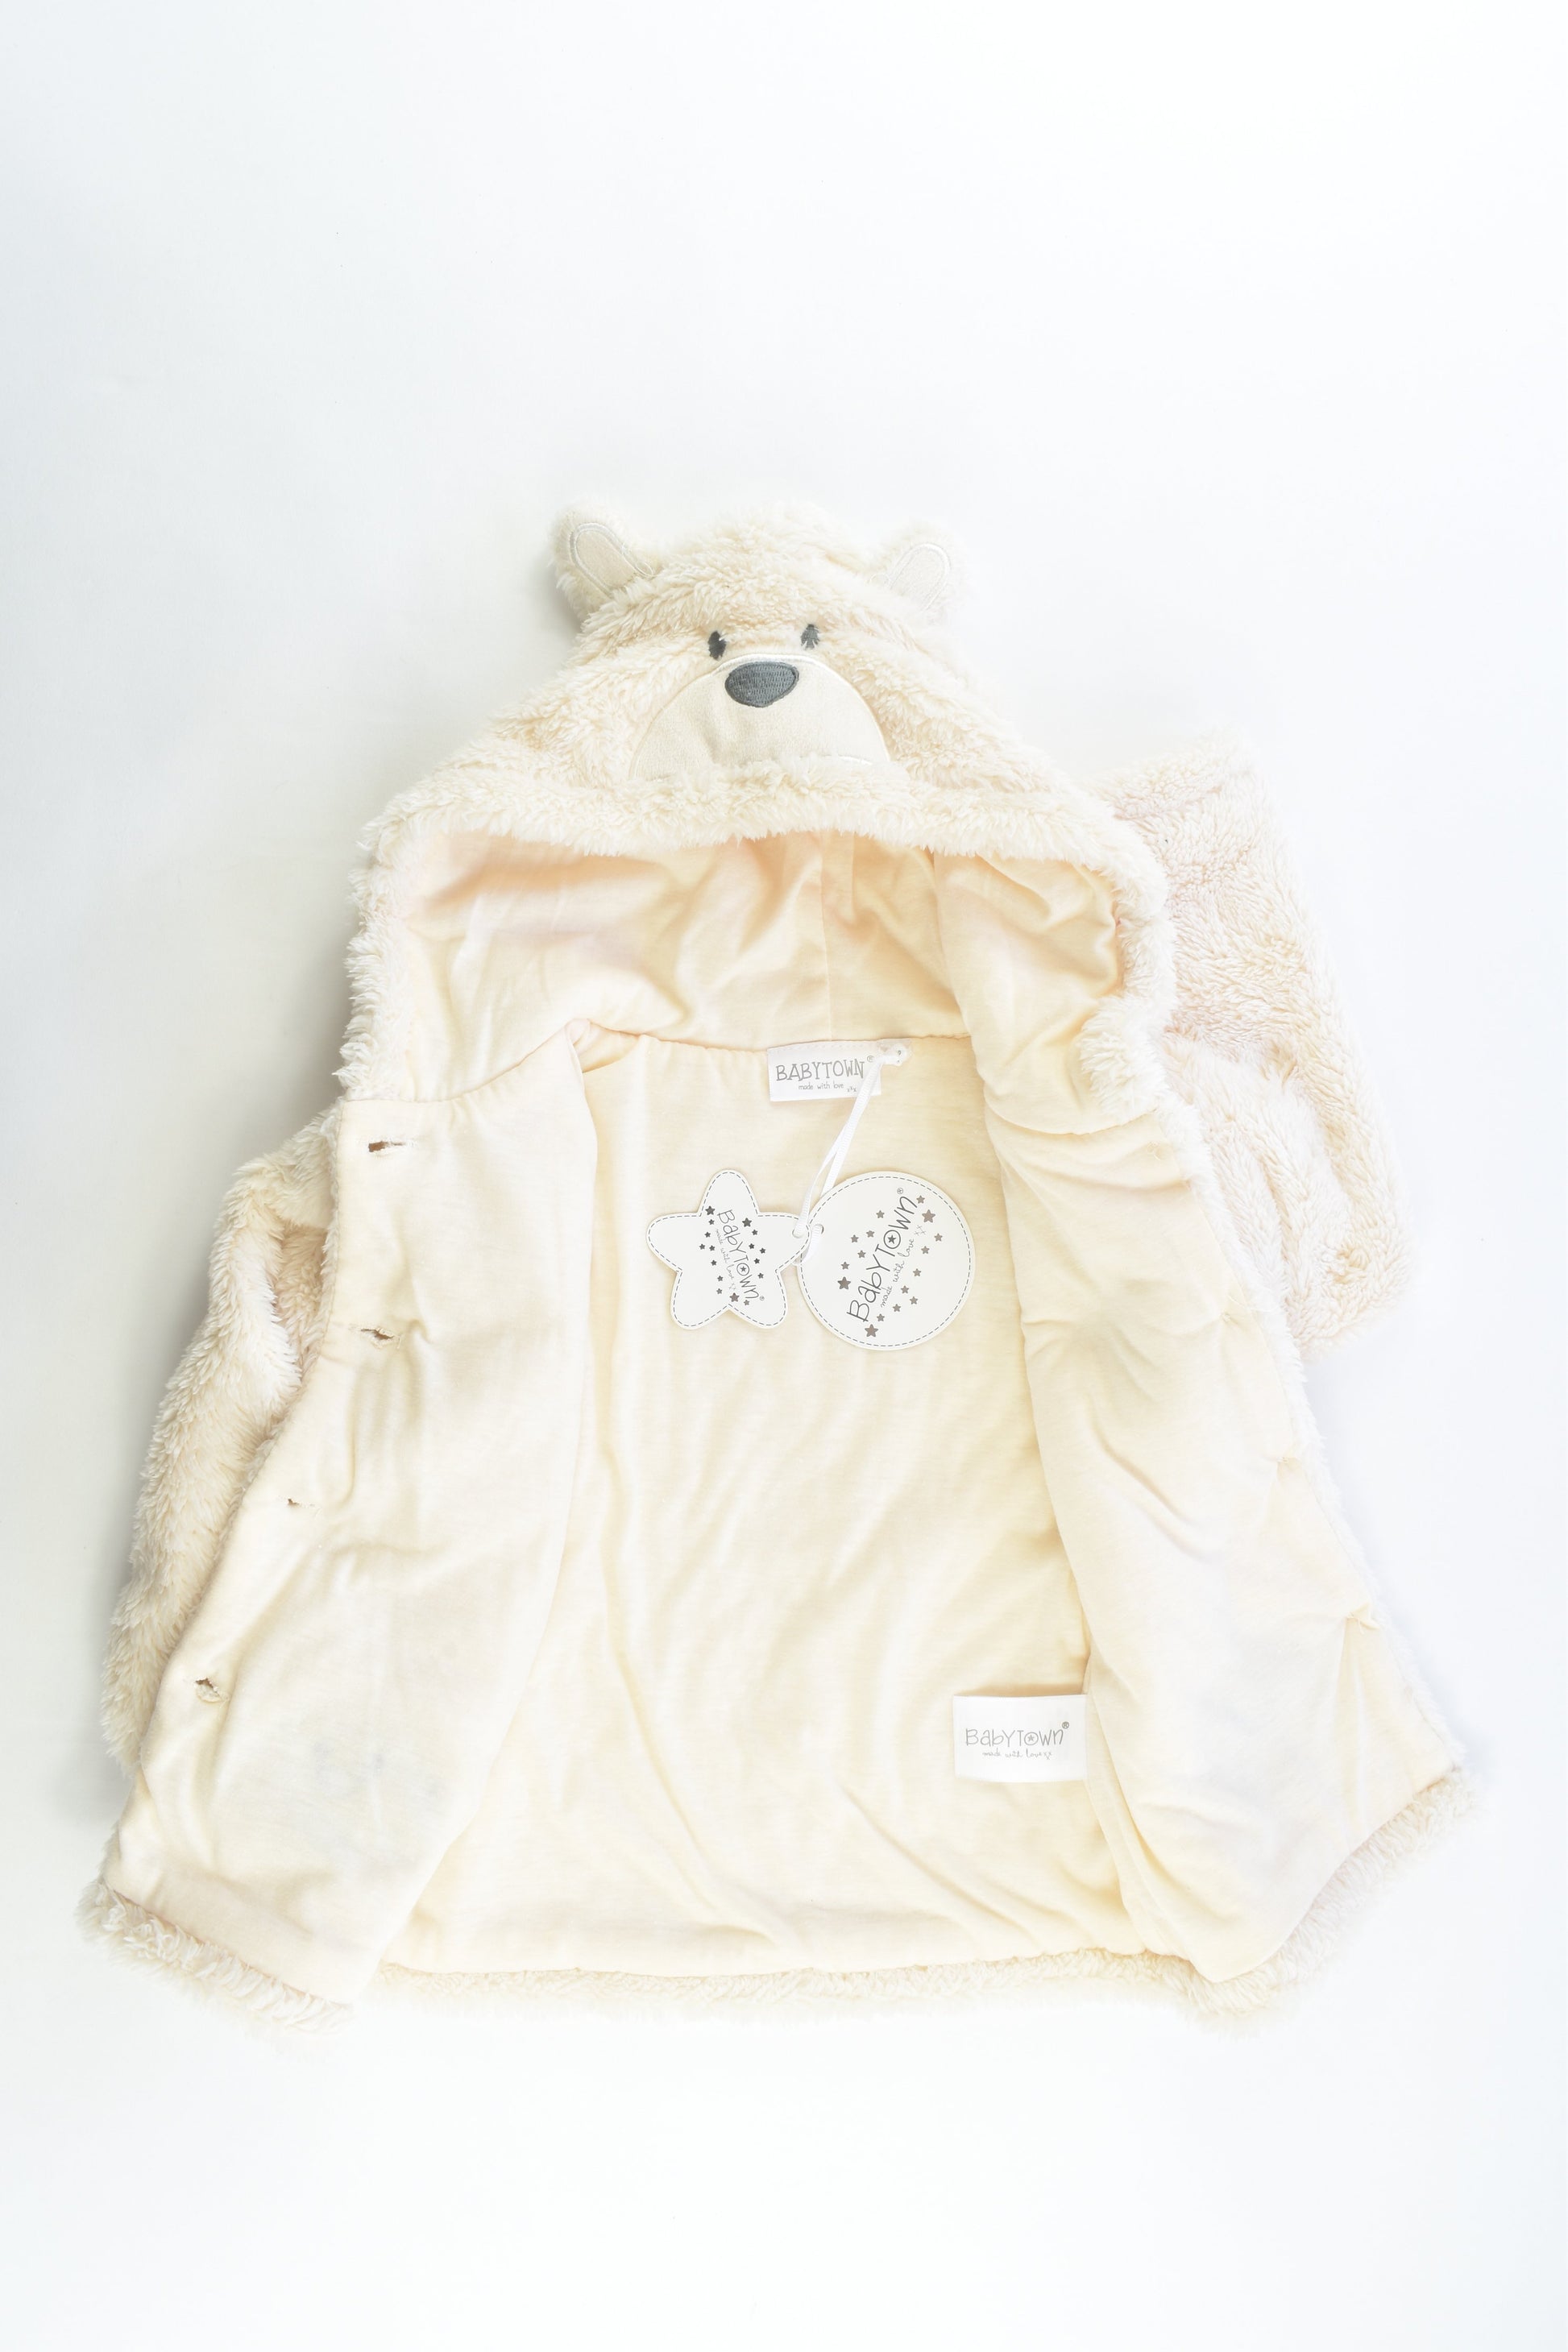 NEW Baby Town Size 2 (18-24 months) Fluffy Teddy Jacket